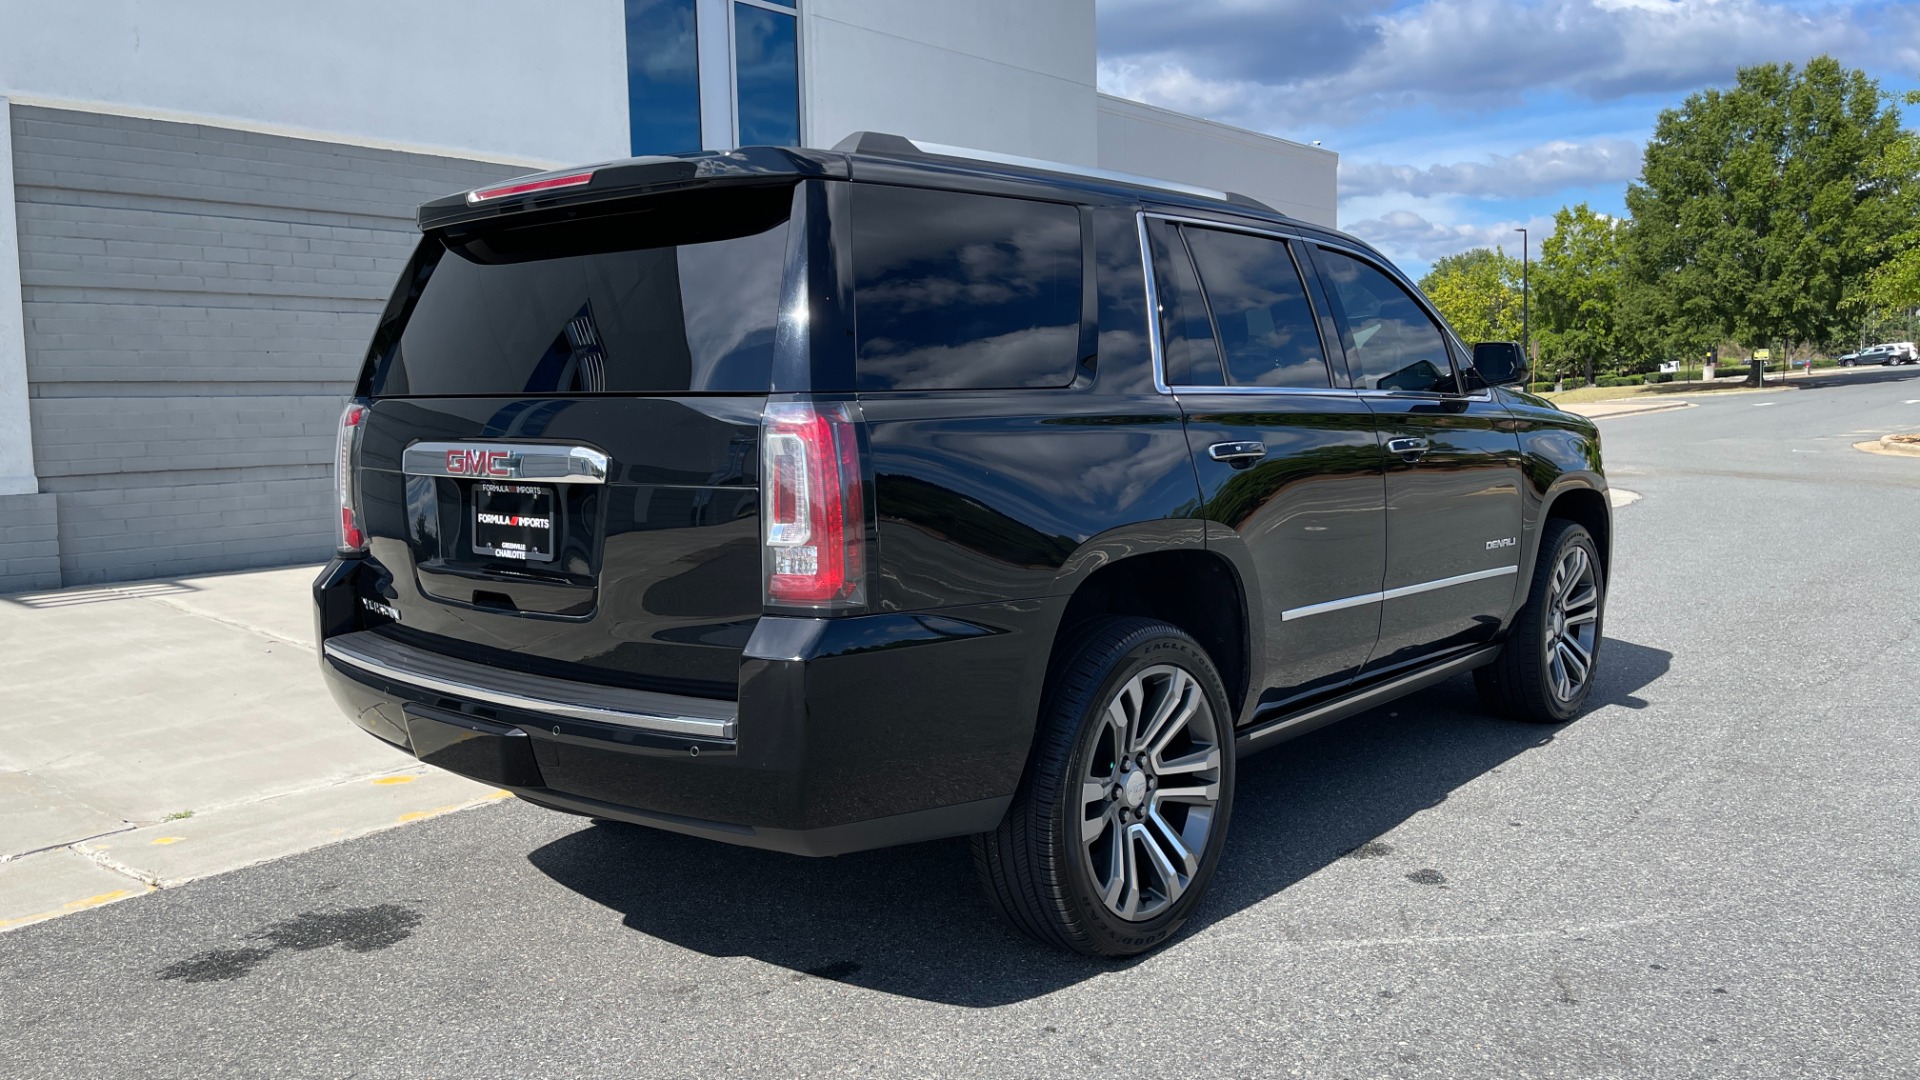 Used 2019 GMC Yukon DENALI / ULTIMATE PACKAGE / DVD / 4X4 / ADAPTIVE CRUISE / SUNROOF for sale $58,295 at Formula Imports in Charlotte NC 28227 4